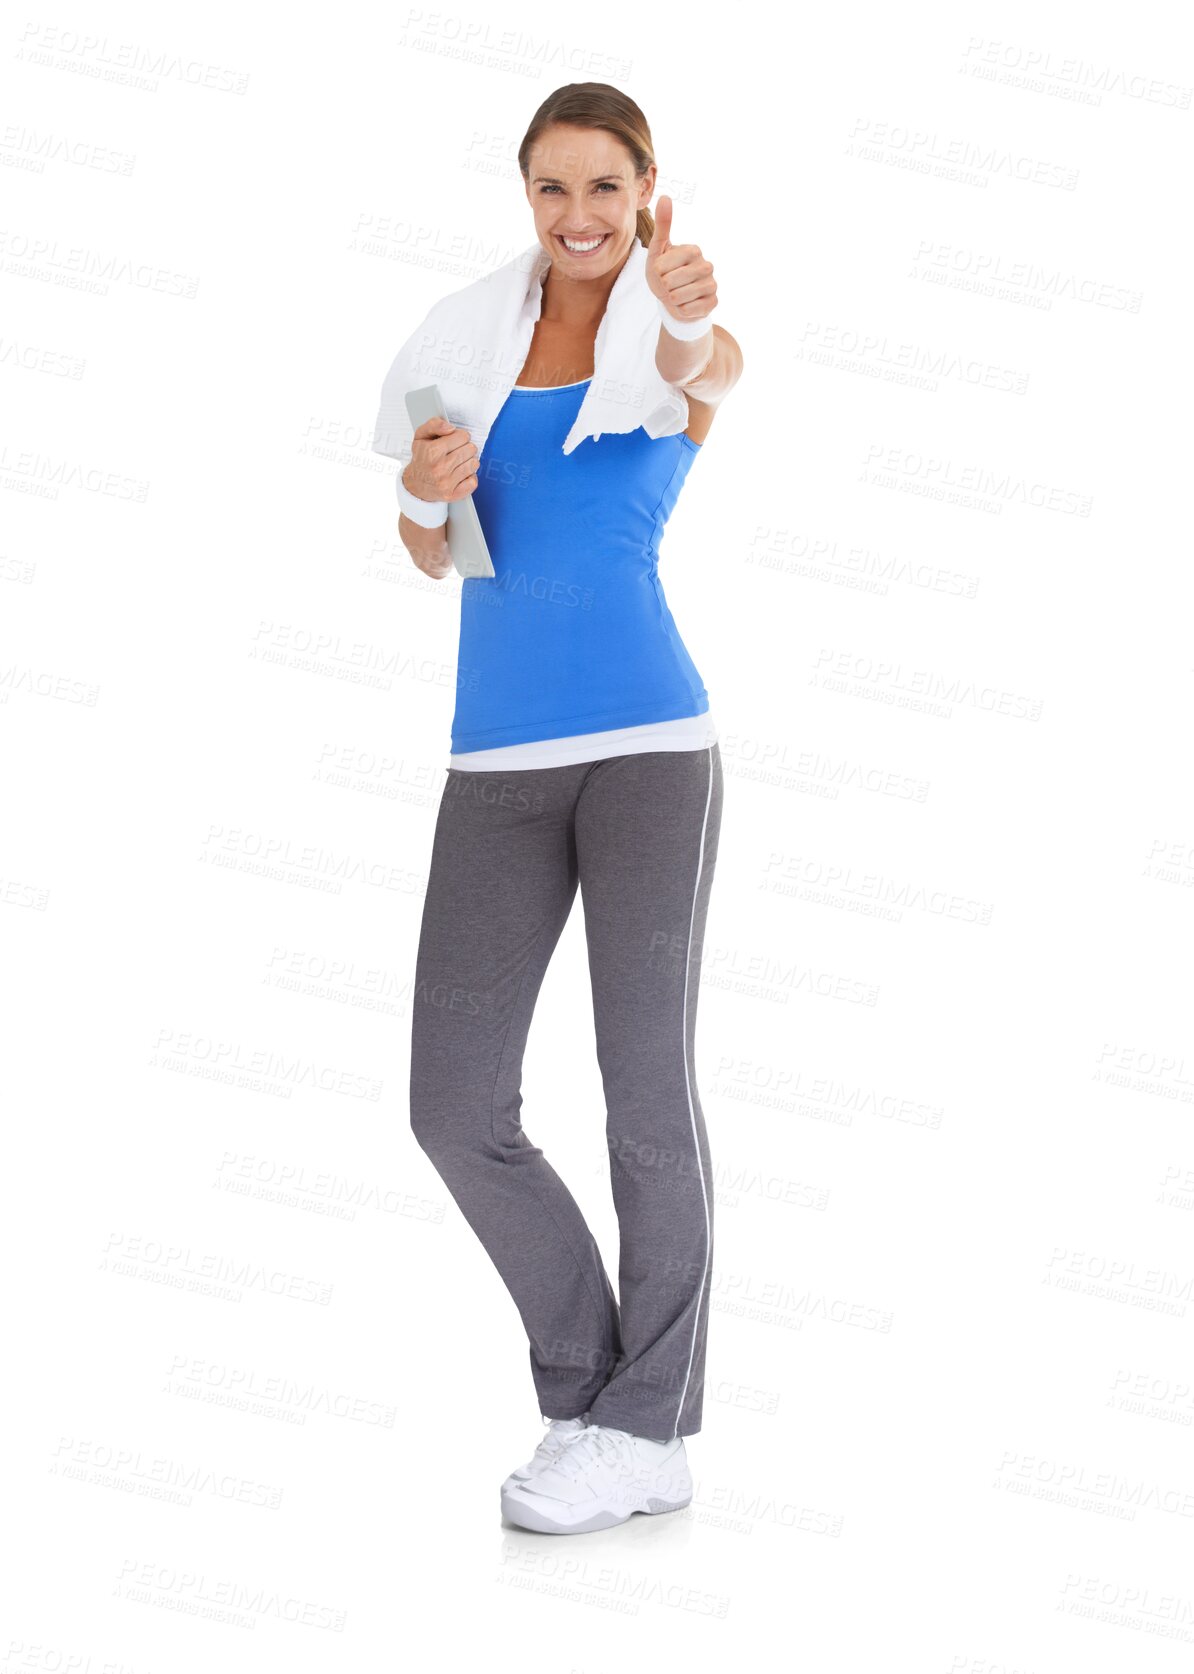 Buy stock photo Portrait, fitness and woman with thumbs up, tablet and smile isolated on a transparent png background. Sports, like hand gesture and technology with emoji for workout goals, training and exercise.